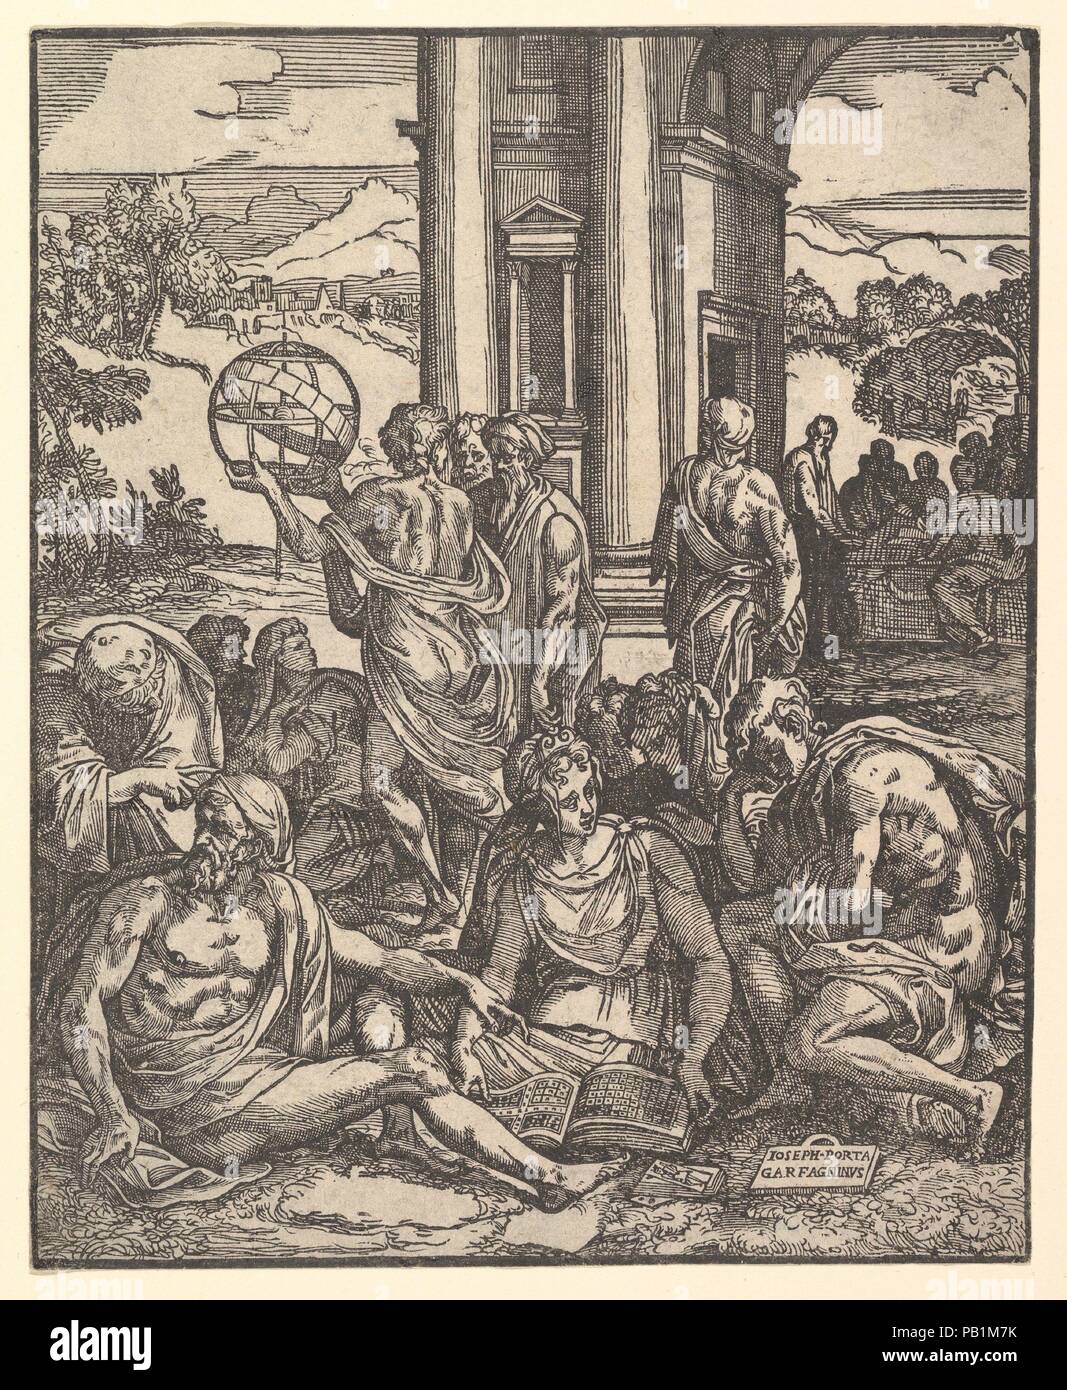 Frontispiece to 'Le sorti di Francesco Marcolini da Forli intitolato Giardino di Pensieri'. Artist: After Marco Dente (Italian, Ravenna, active by 1515-died 1527 Rome); Giuseppe Salviati (Giuseppe Porta, called Il Salviati) (Italian, Castelnuovo di Garfagnana ca. 1520-ca. 1575 Venice). Dimensions: sheet: 9 7/16 x 7 5/8 in. (23.9 x 19.3 cm). Date: 1540.  This woodcut of a scholarly gathering is fully signed by Giuseppe Salviati yet is an almost exact copy of an engraving by Marco Dente, who died in 1527. The only changes are the adaptation of the book in the foreground to represent Marcolini's  Stock Photo